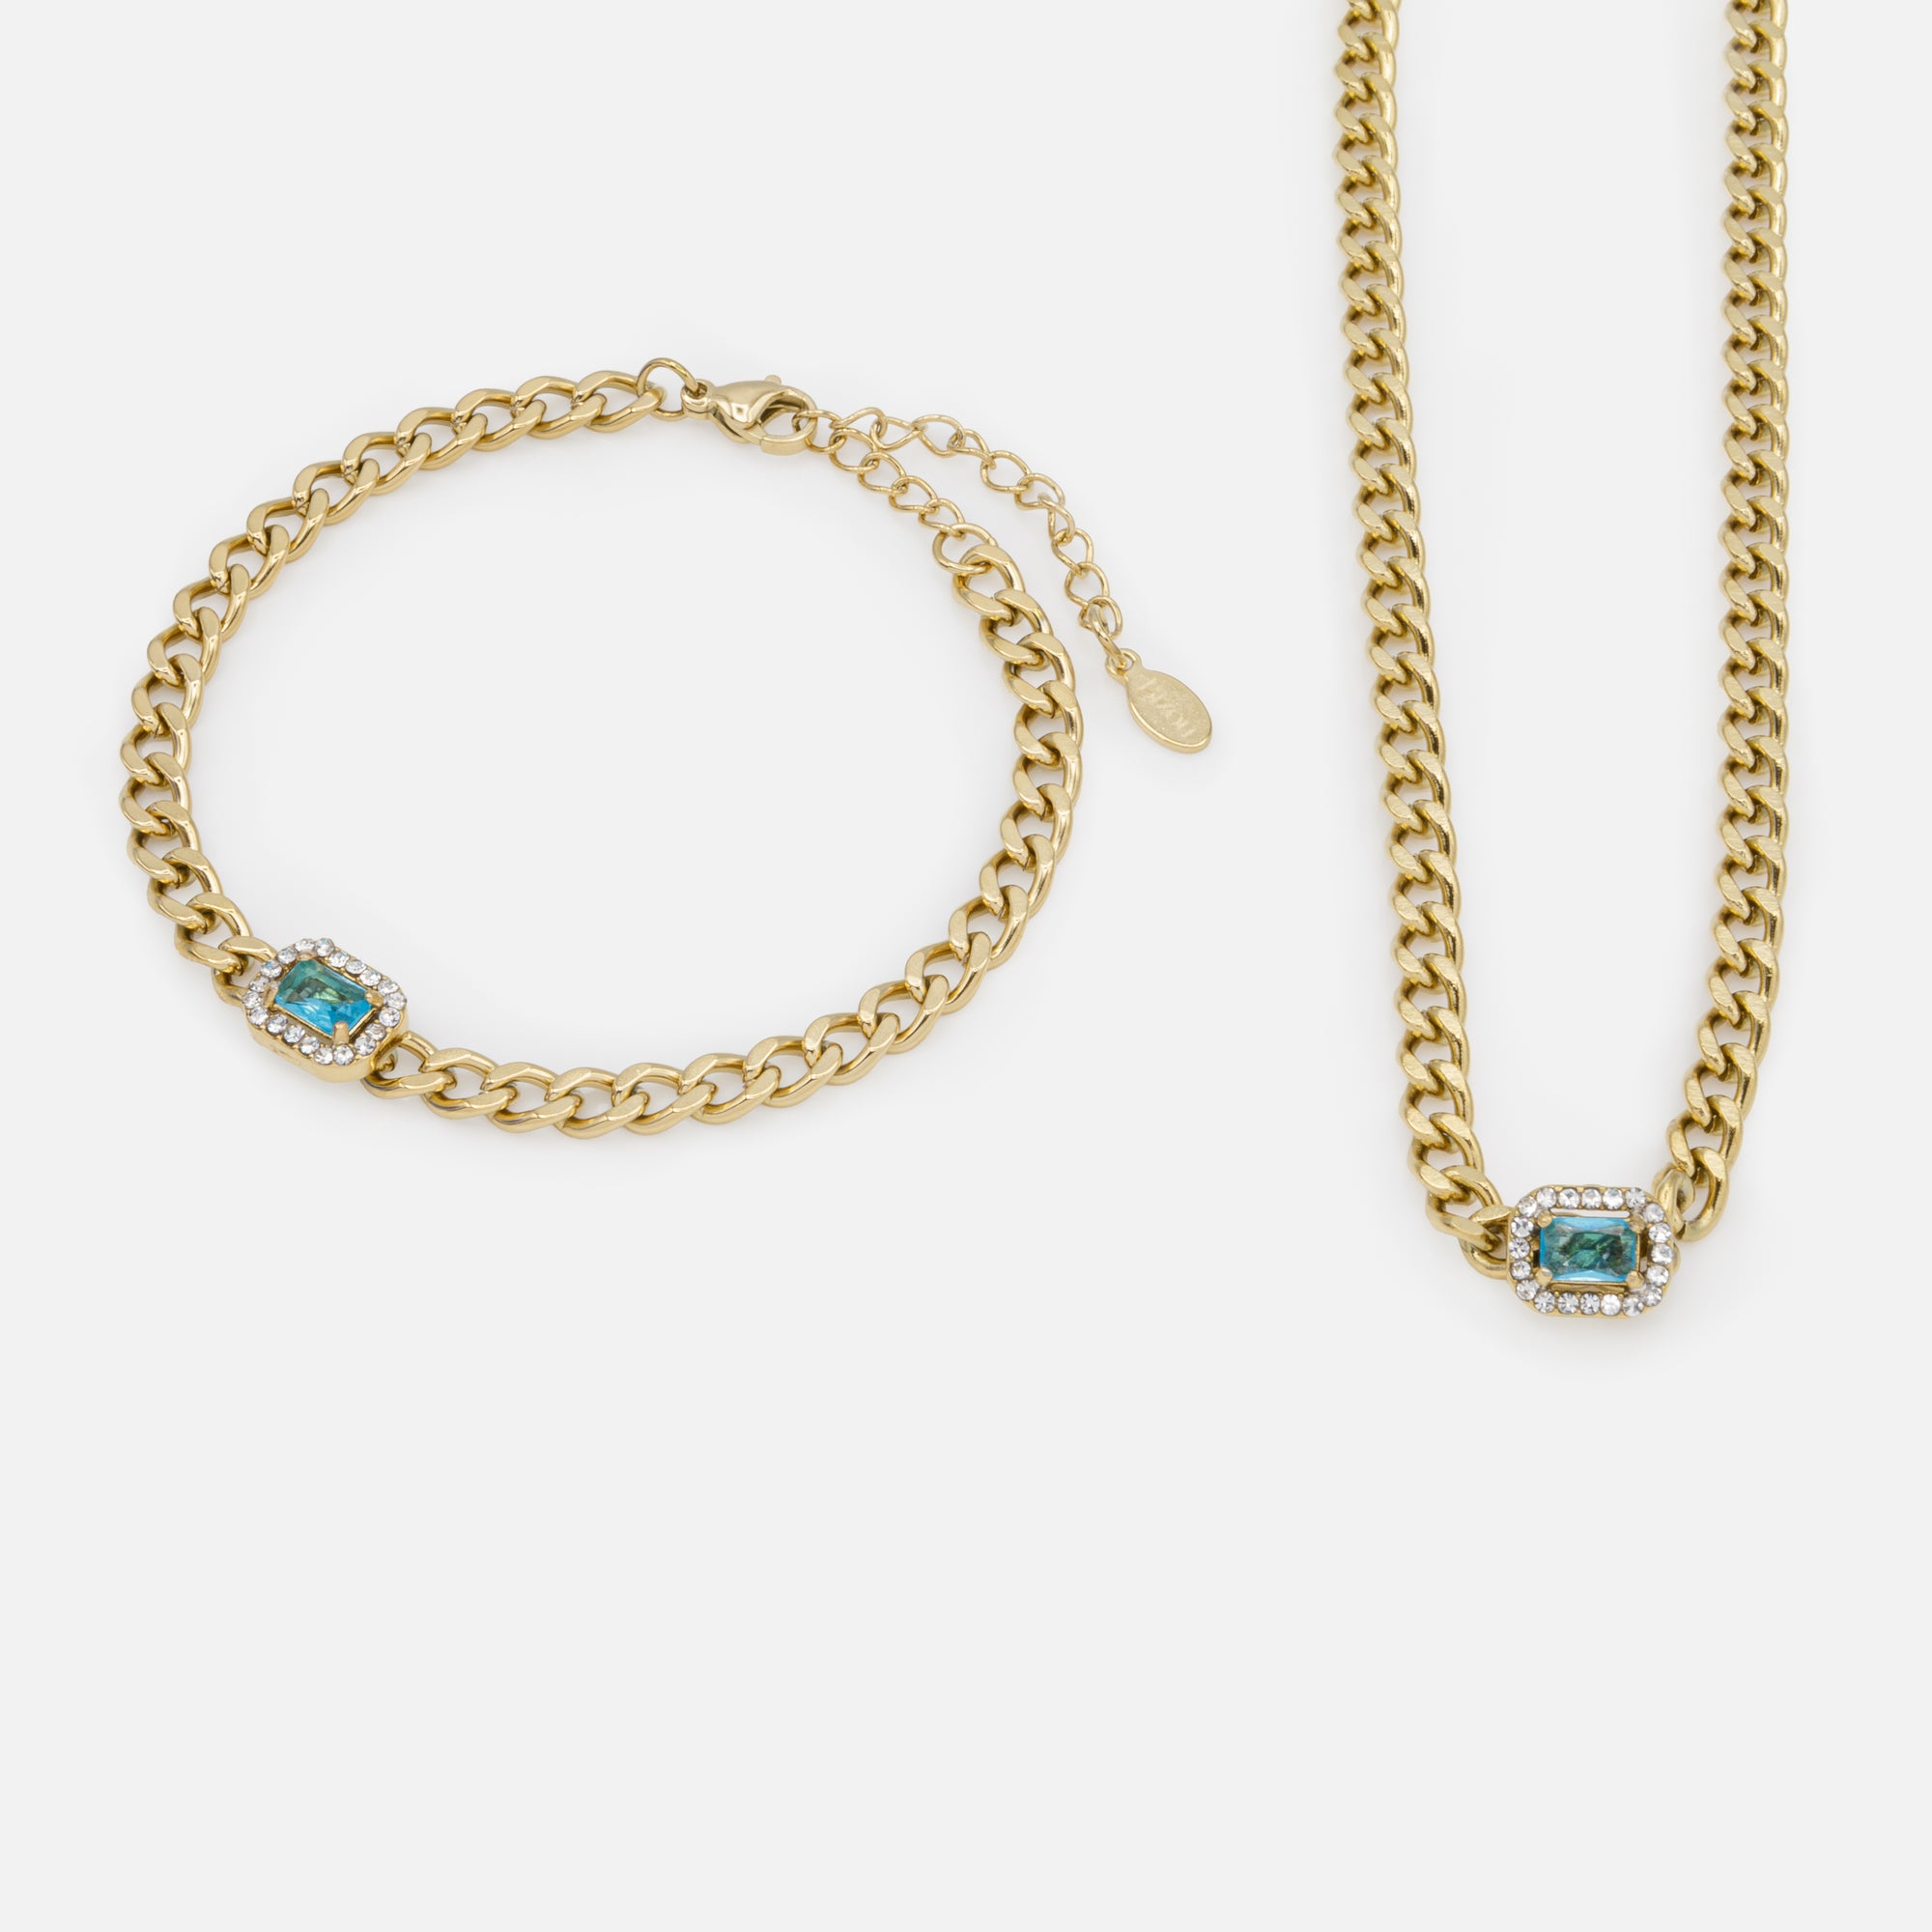 Gold Curb Link Necklace and Bracelet Set with Blue Stone and Cubic Zirconia in Stainless Steel